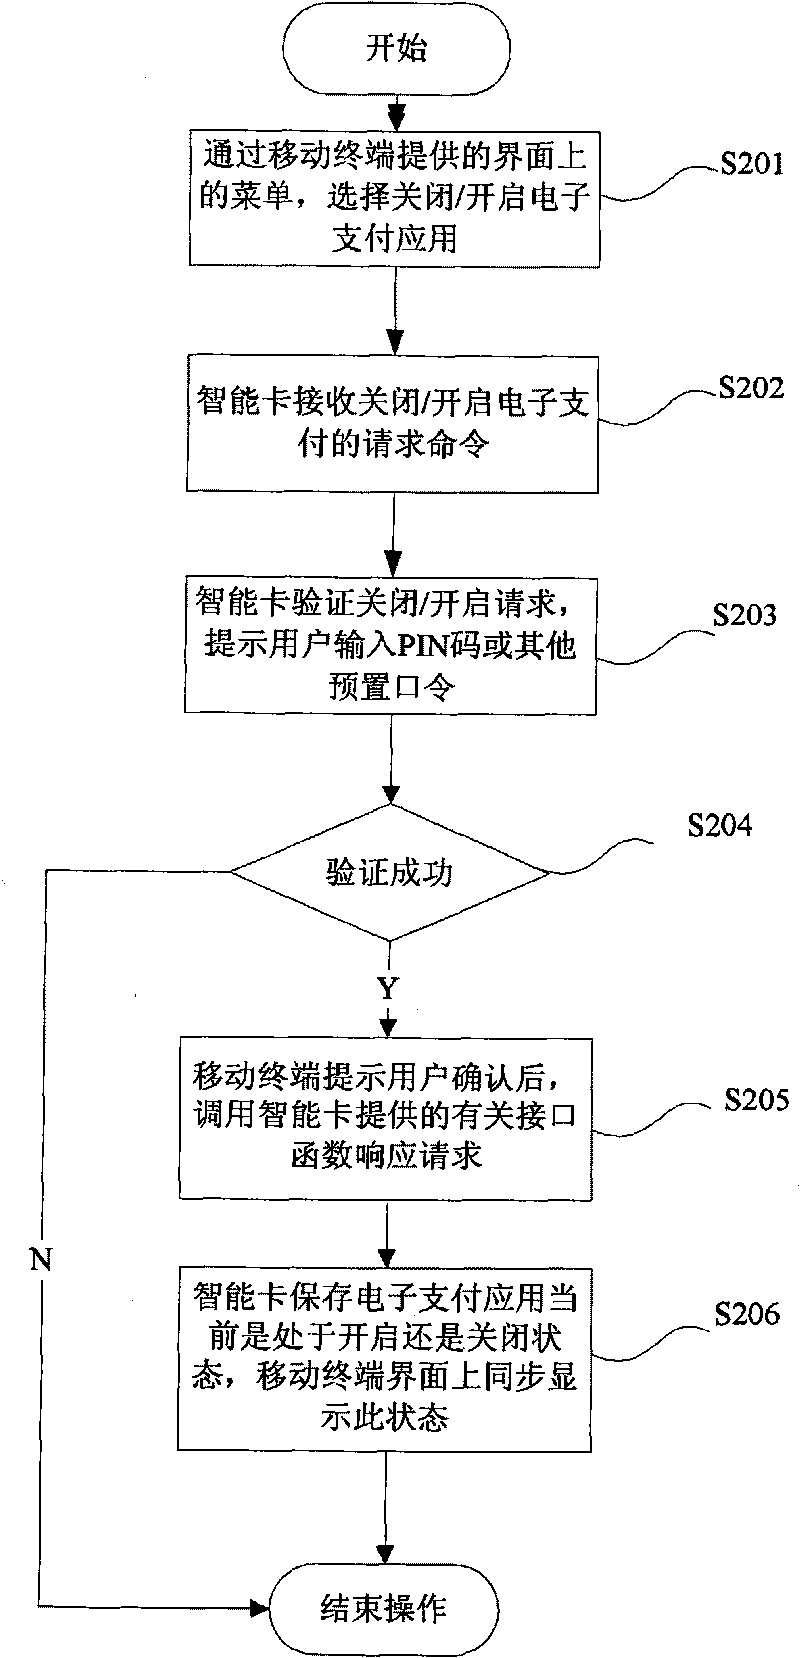 Method for closing and opening electronic payment application